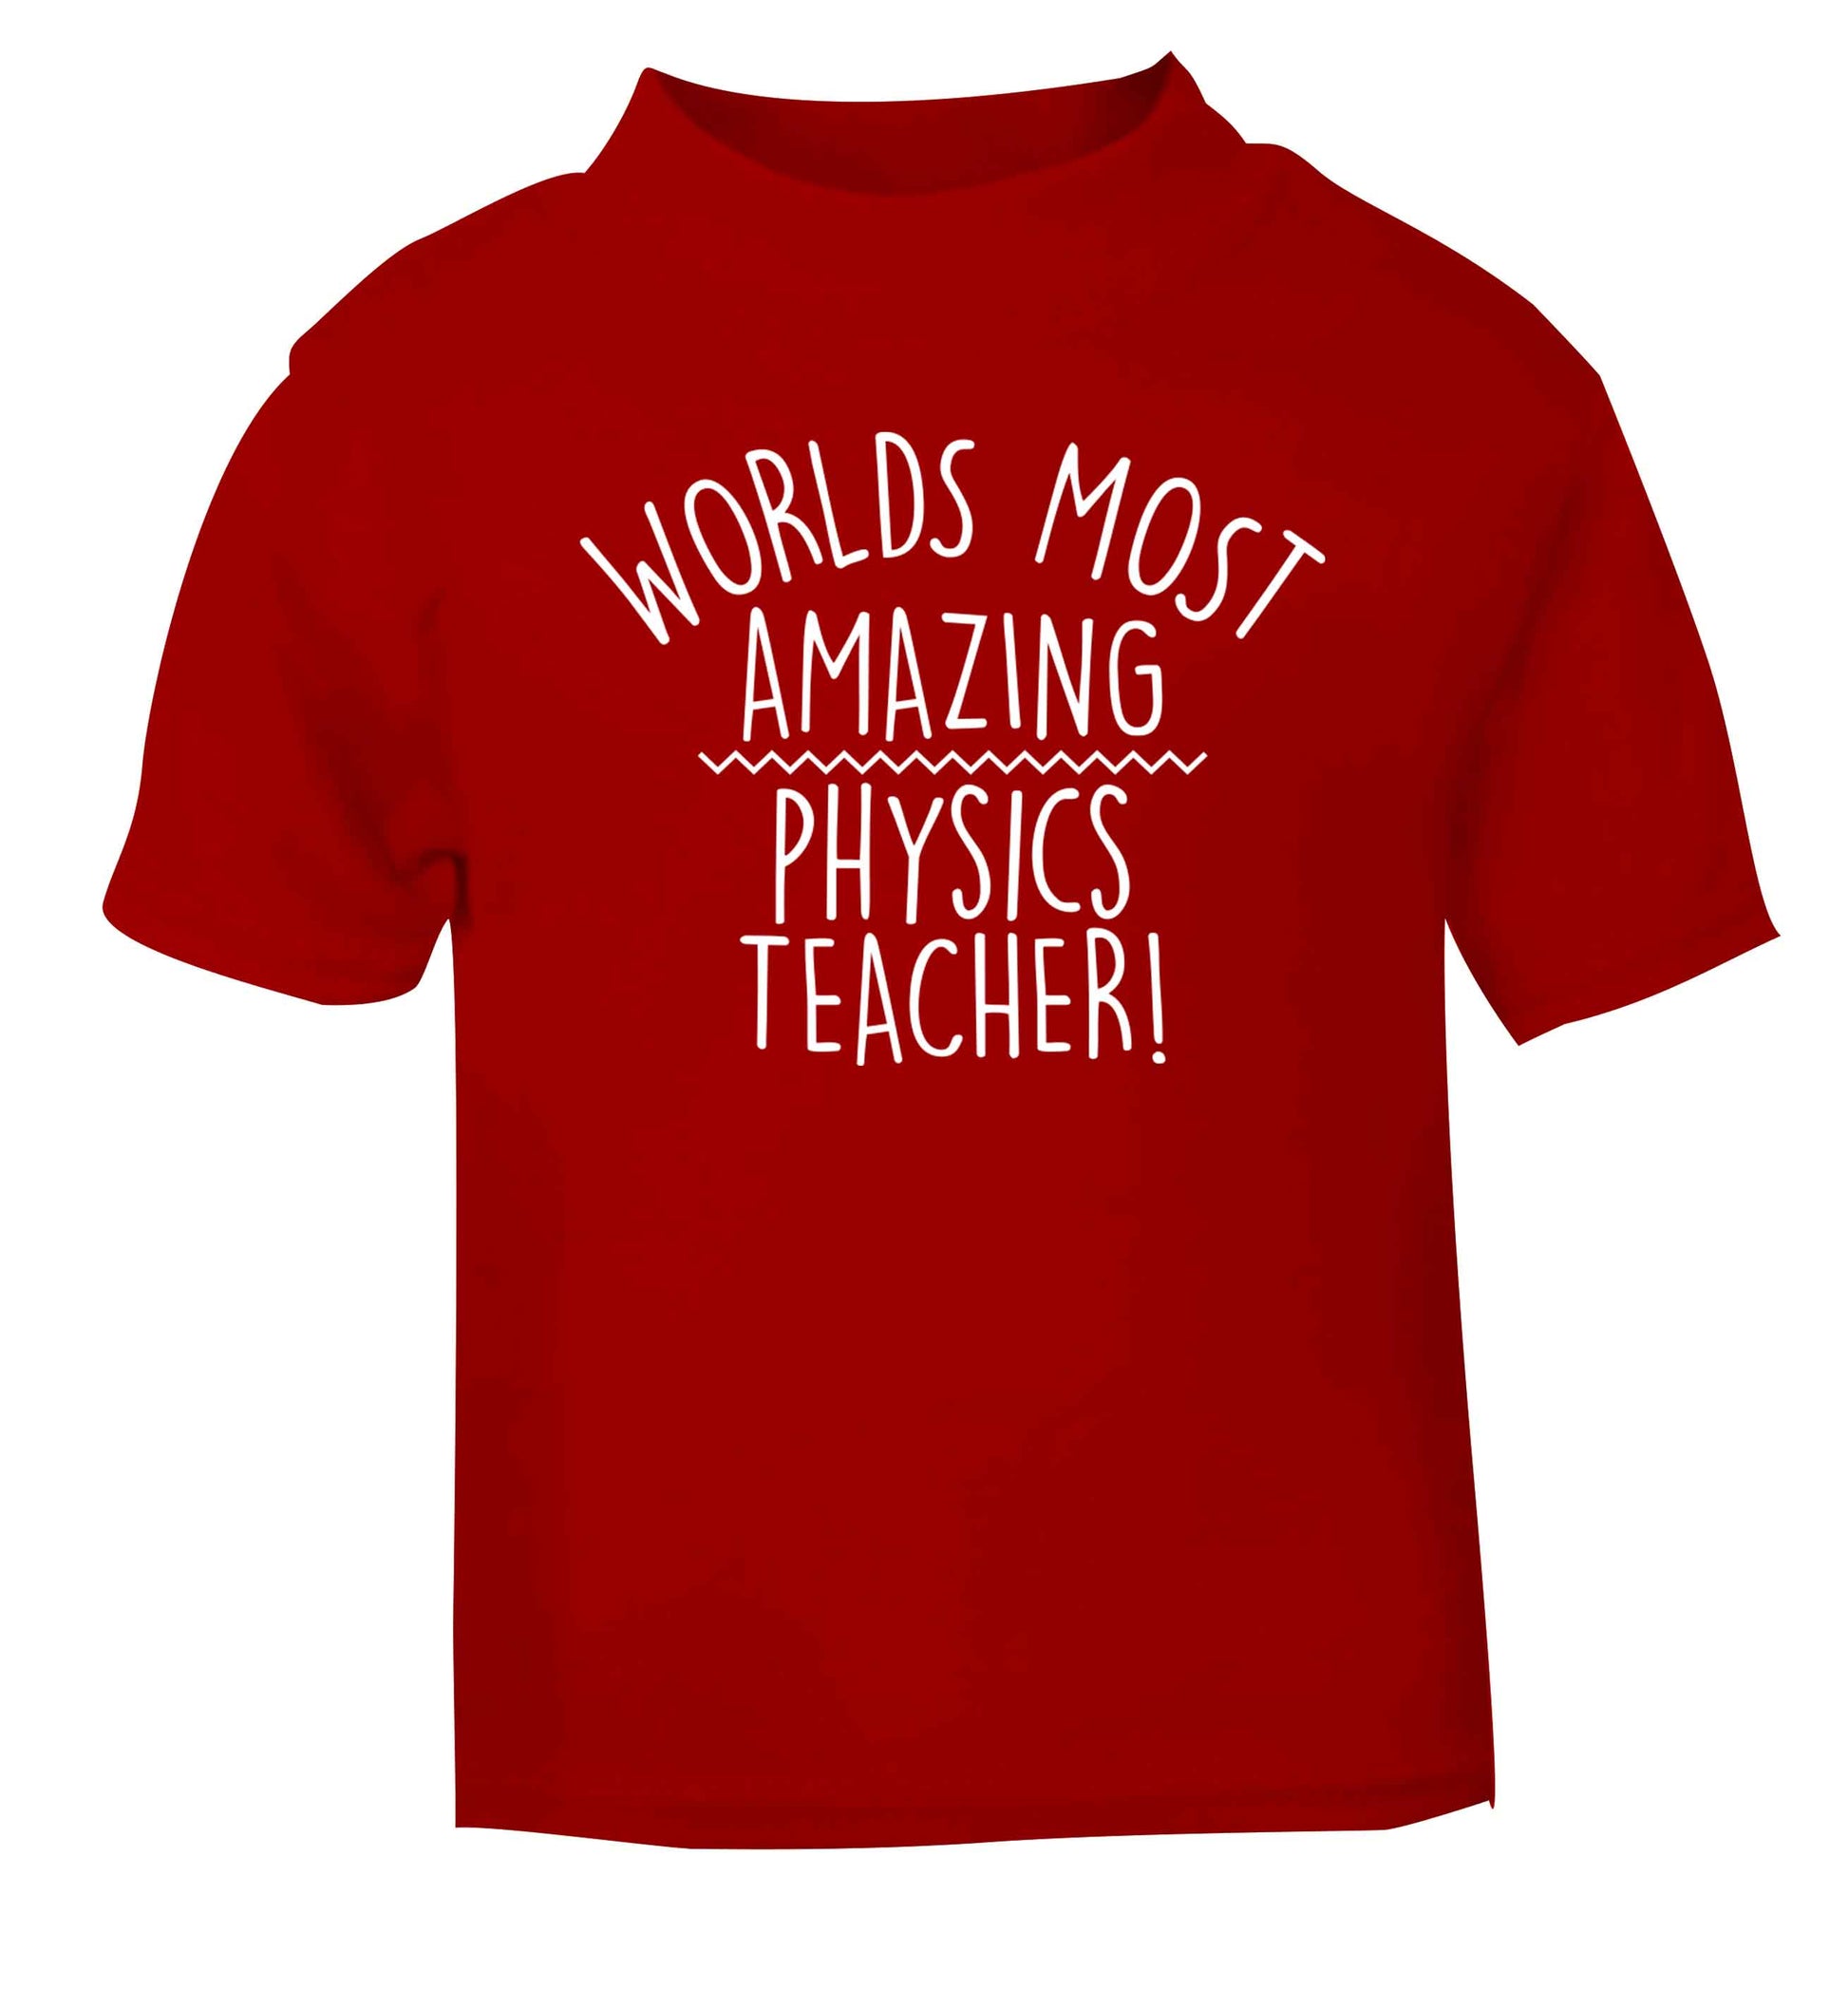 Worlds most amazing physics teacher red baby toddler Tshirt 2 Years